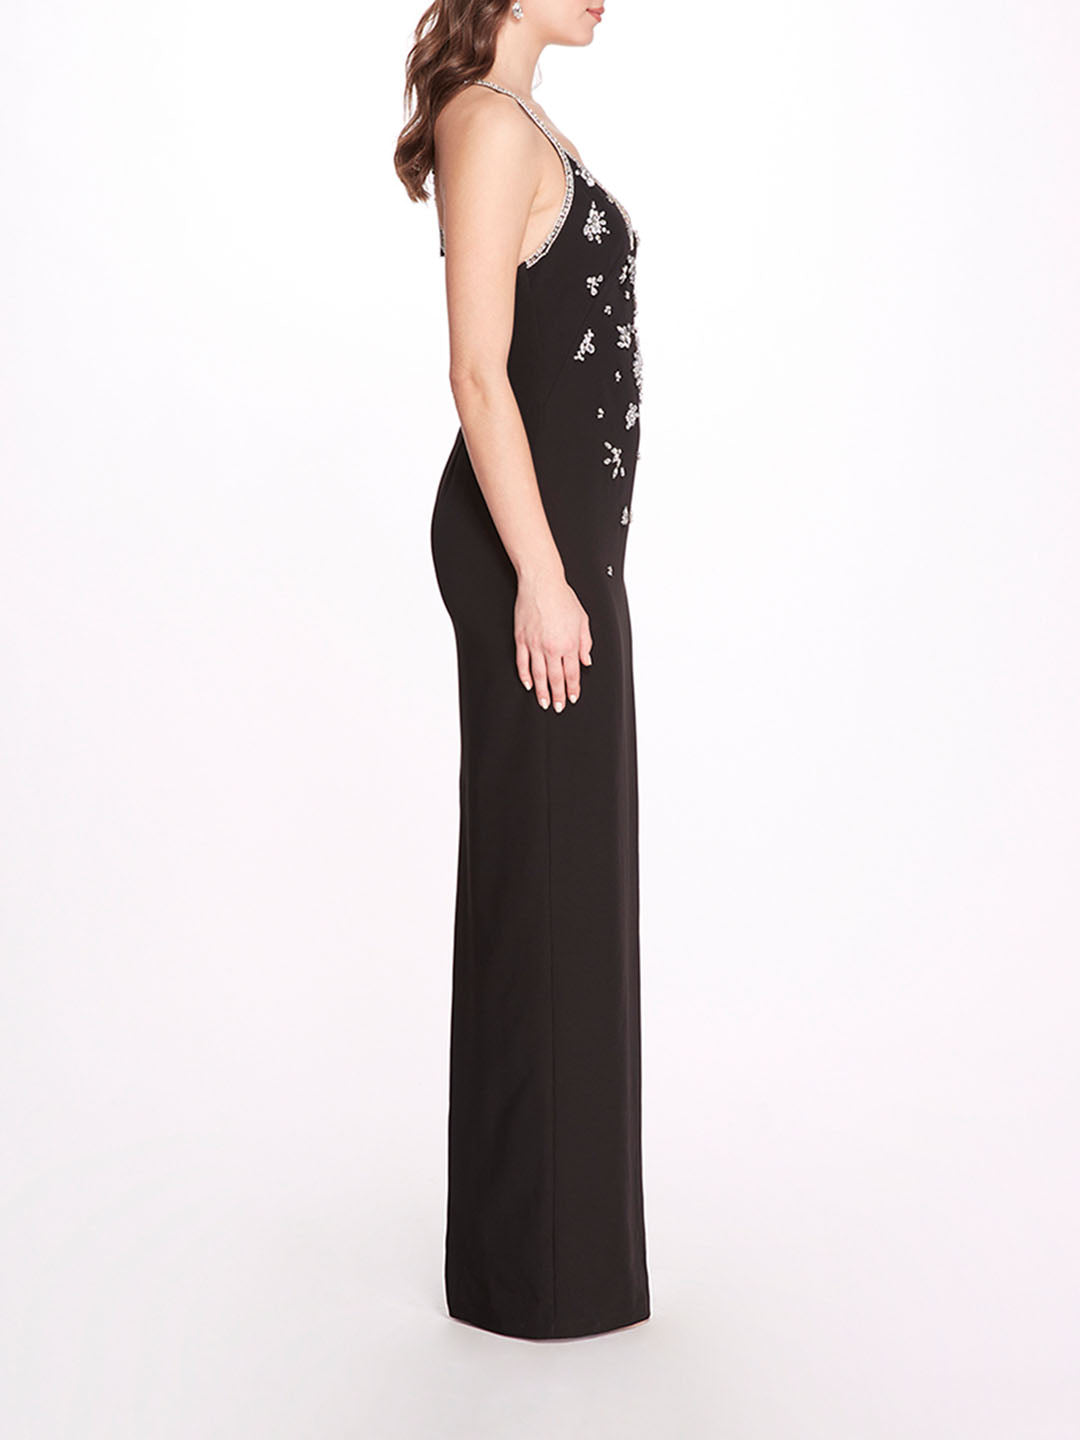 Crystal Embellished Sleeveless Gown | Marchesa